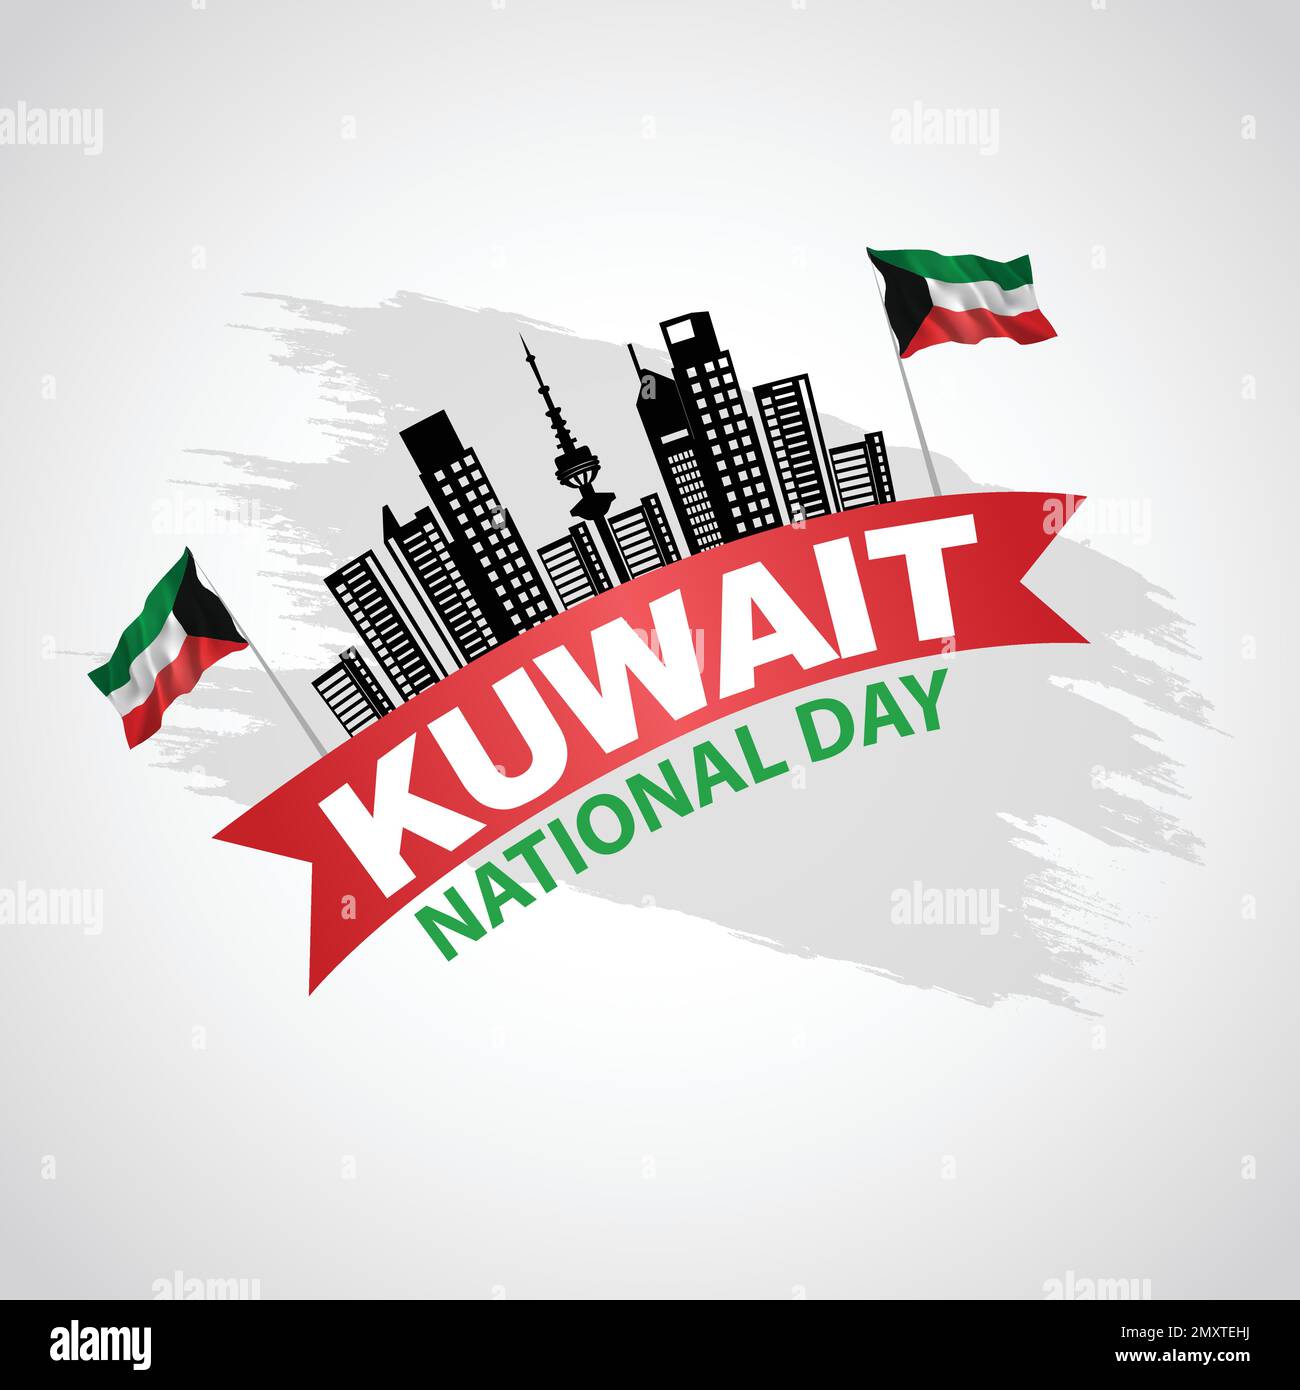 Kuwait national day25th February with flags. vector illustration design Stock Vector